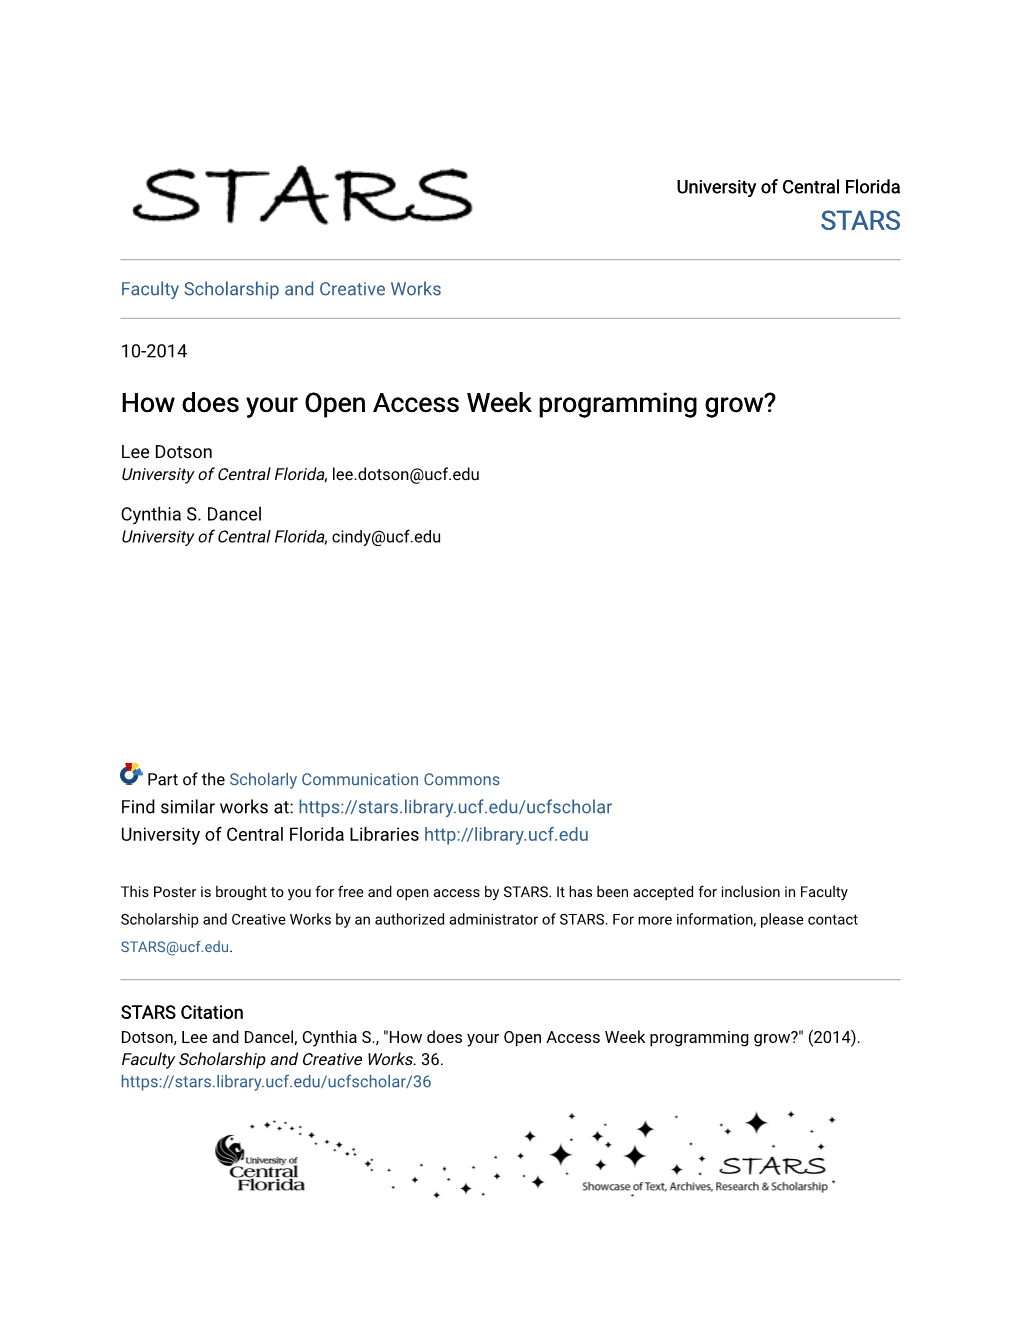 How Does Your Open Access Week Programming Grow?